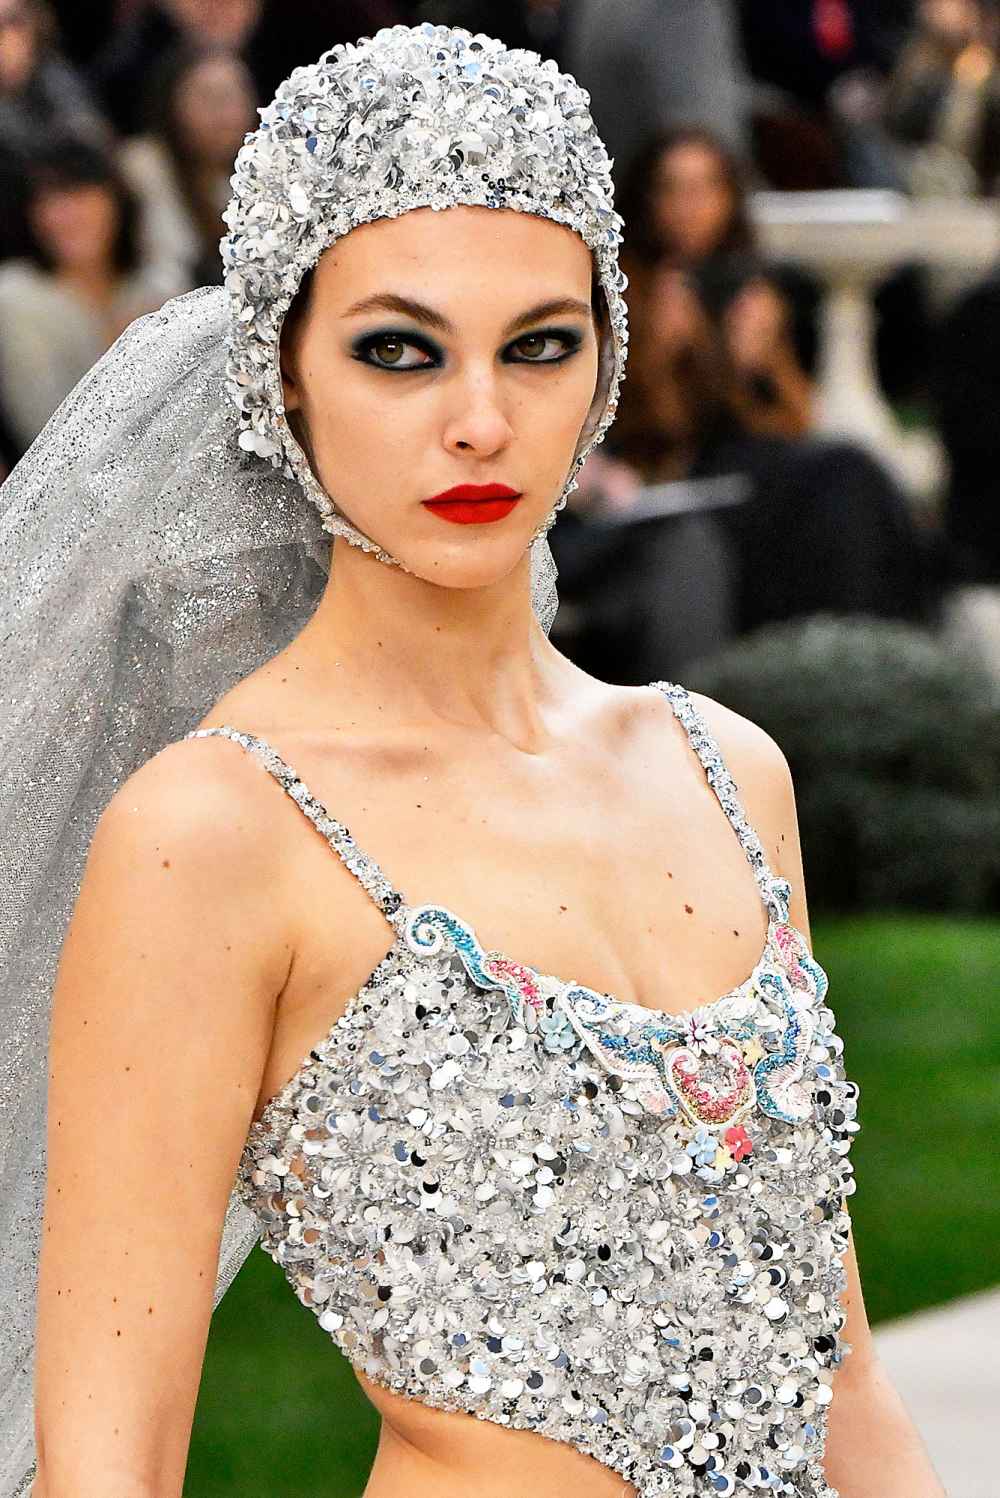 Vittoria Ceretti Chanel Reinvents the Wedding Dress as a ... Swimsuit